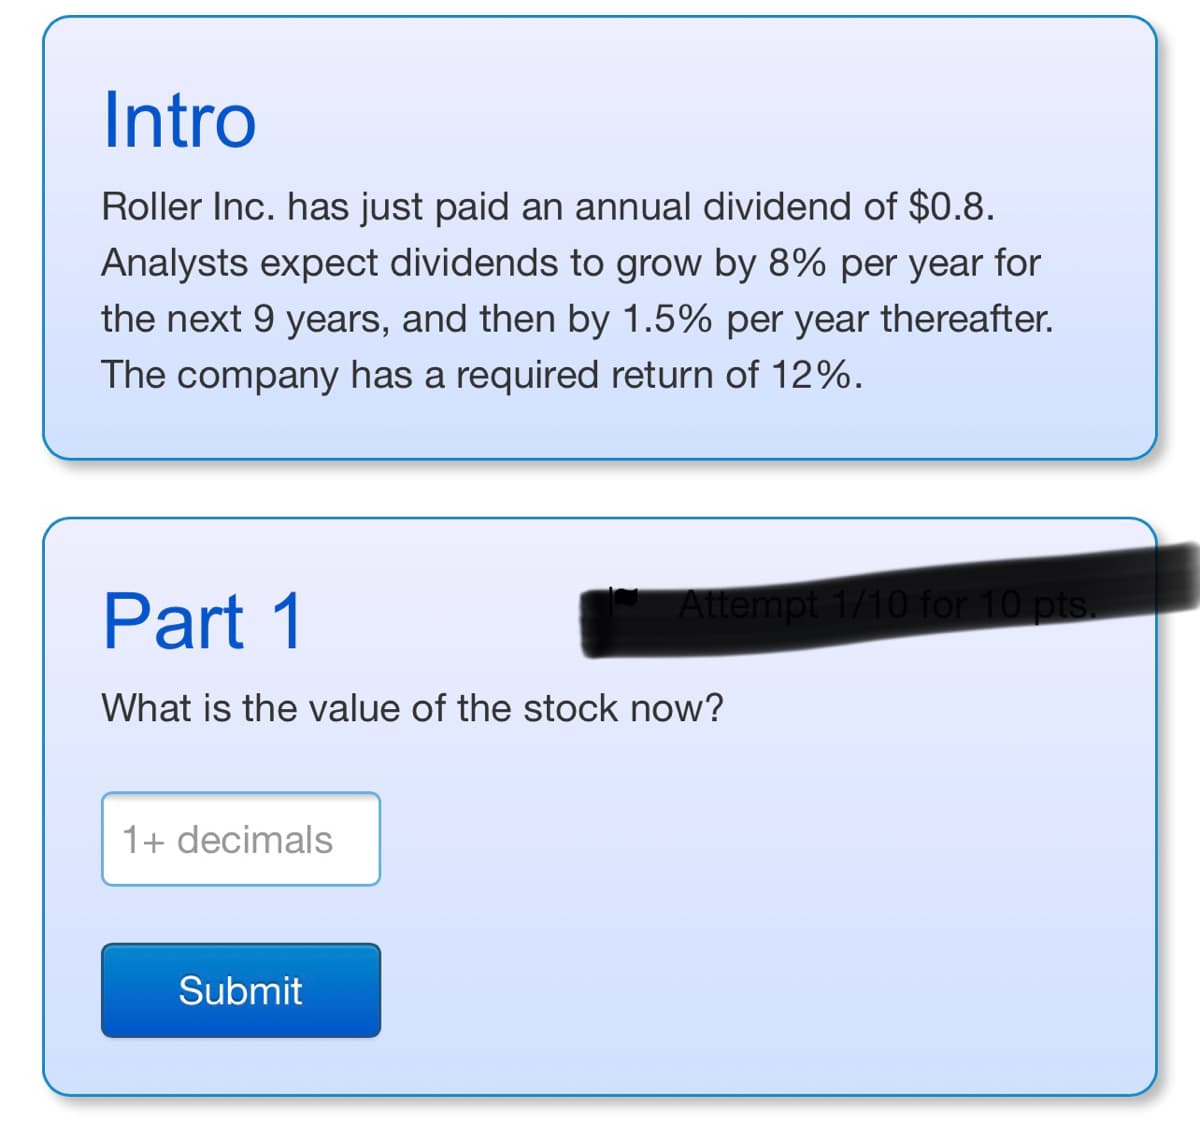 ---
### Intro

Roller Inc. has just paid an annual dividend of $0.8. Analysts expect dividends to grow by 8% per year for the next 9 years, and then by 1.5% per year thereafter. The company has a required return of 12%.

### Part 1

**Question:**
What is the value of the stock now?

**Input Field:**
- You can enter the value with one or more decimal places (e.g., 10.5).

**Submit Button:**
- Click to submit your answer.

---